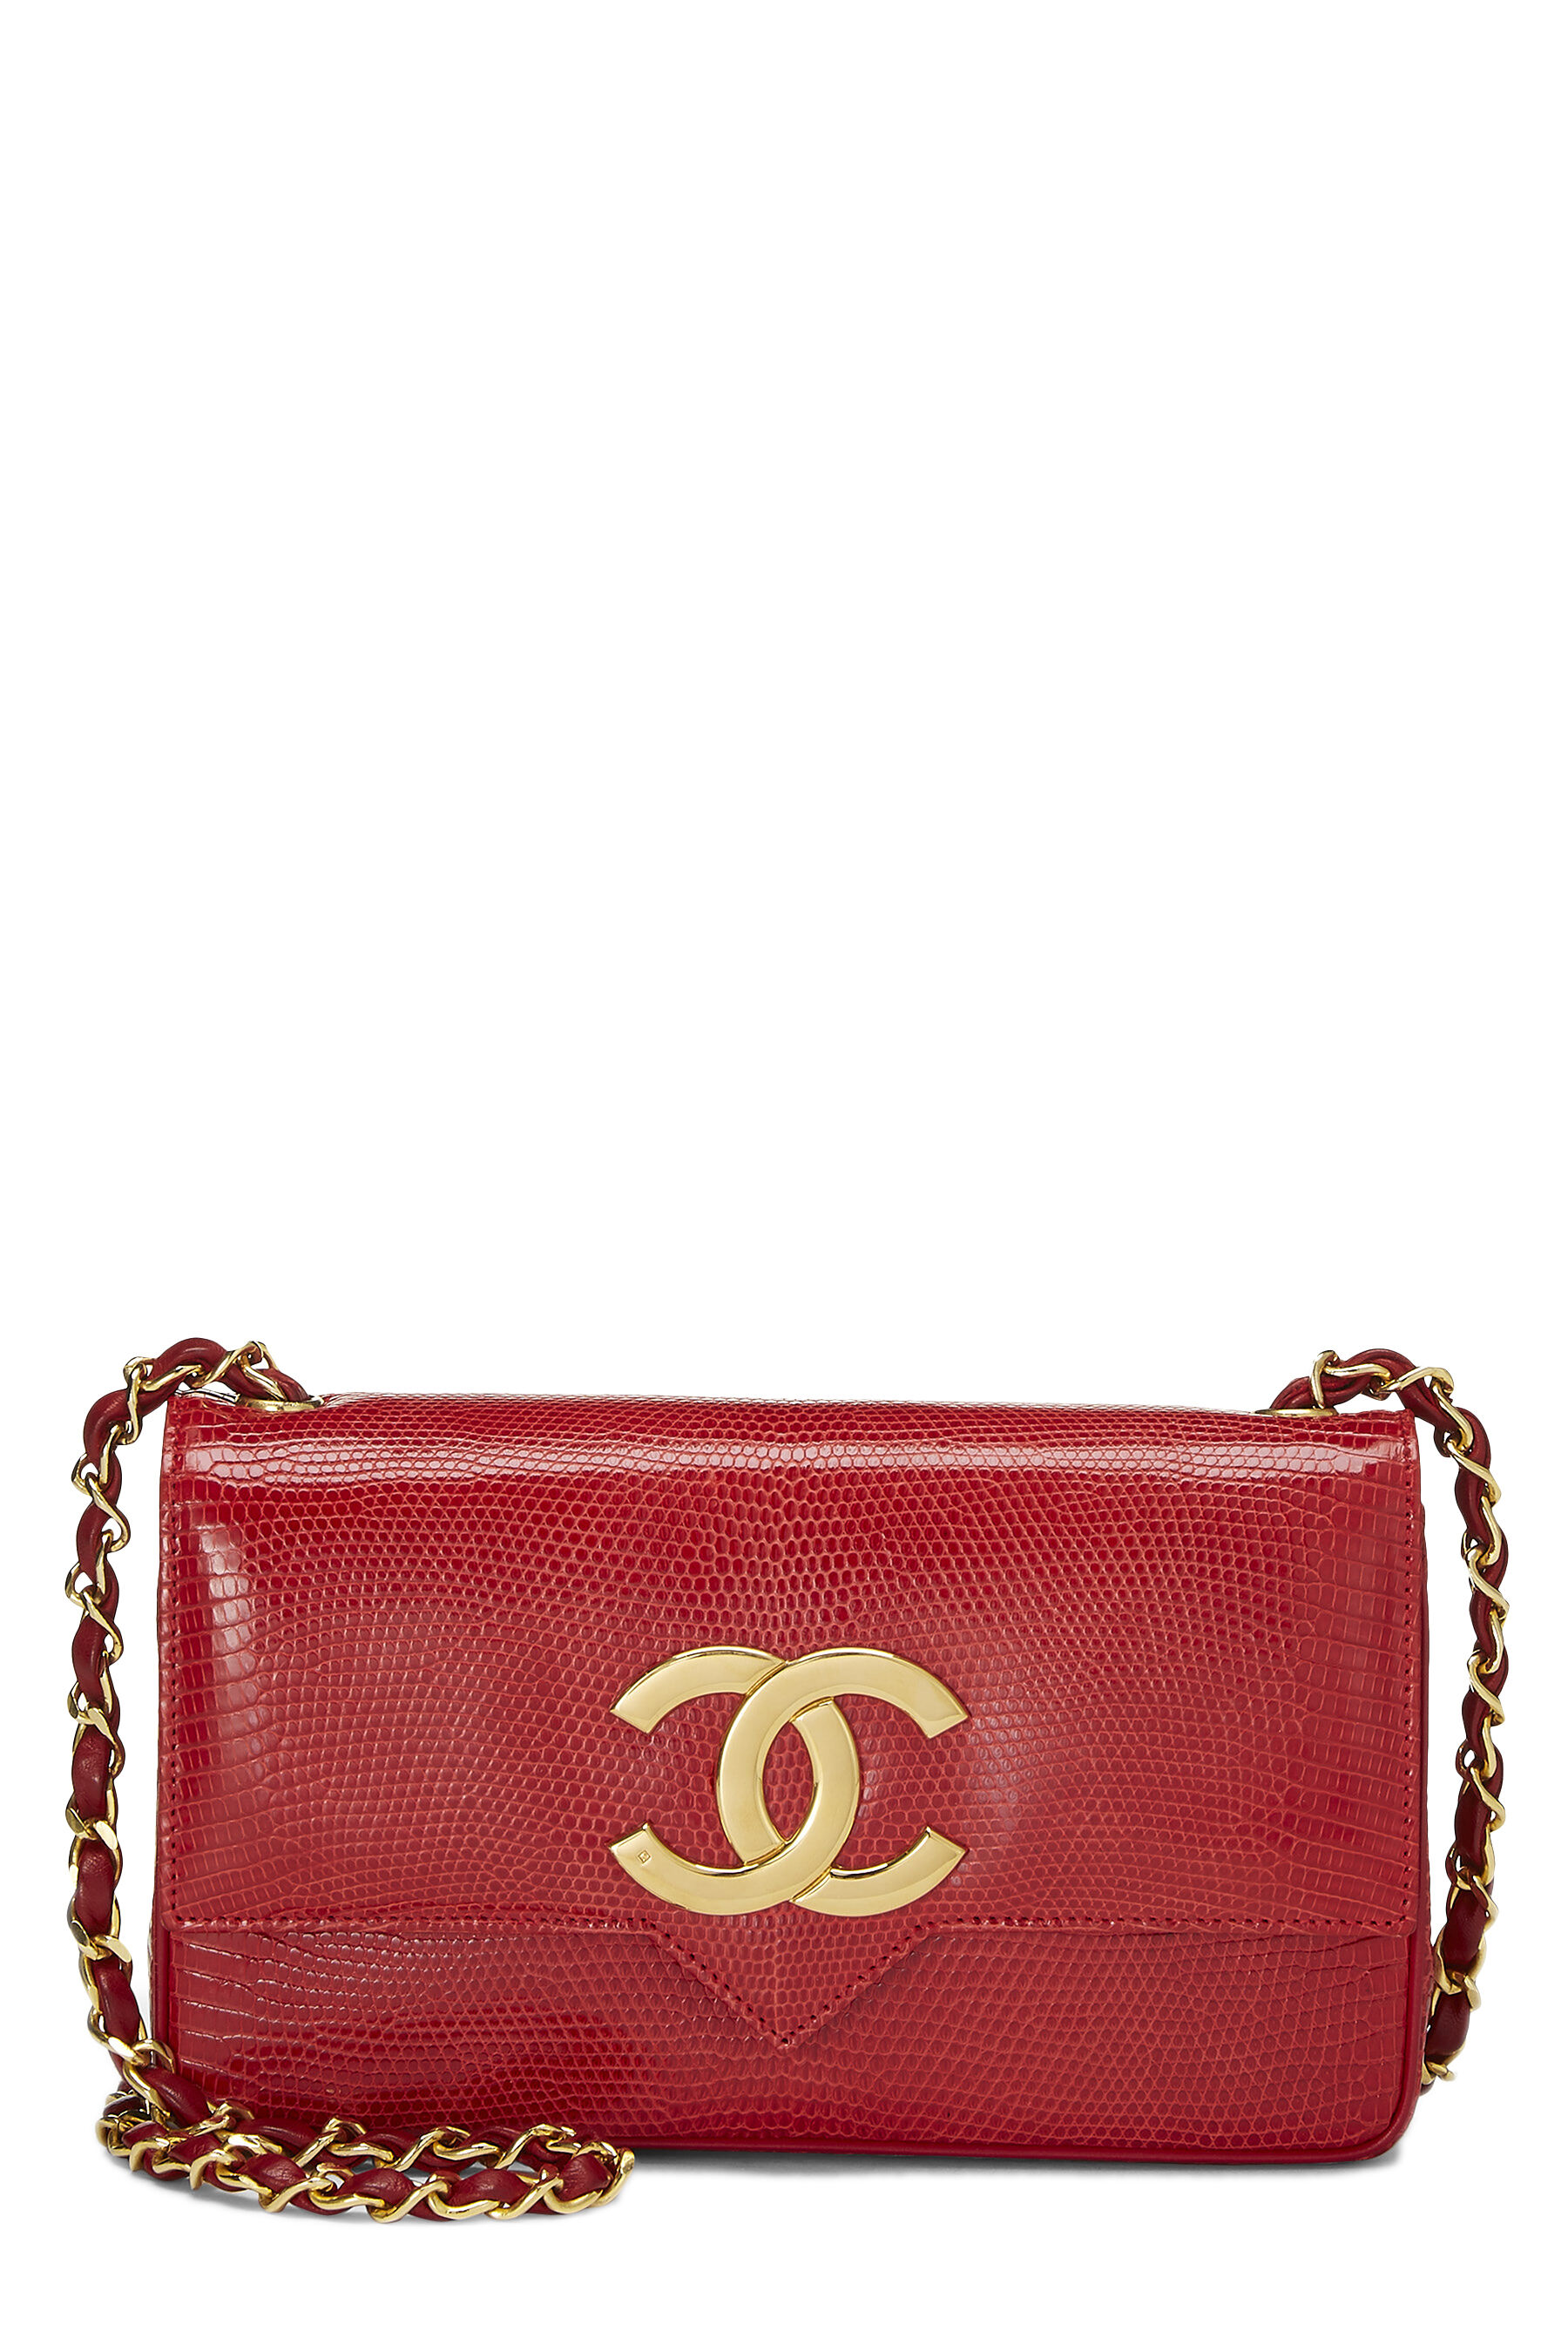 Chanel - Red Lizard Point Flap Small